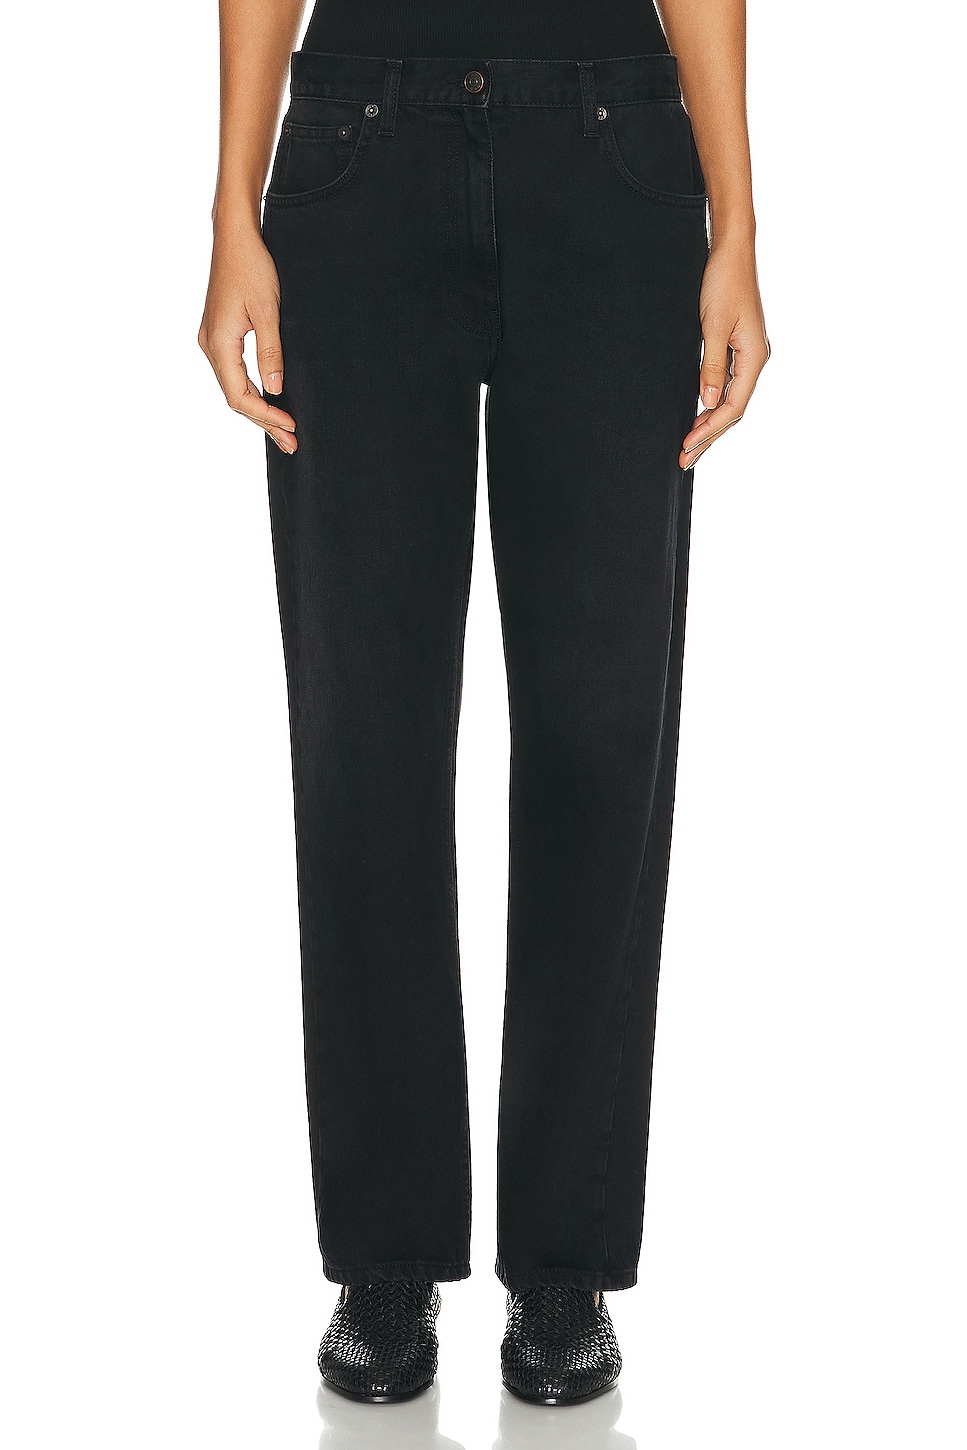 Image 1 of The Row Ryley Straight Leg Pant in Black